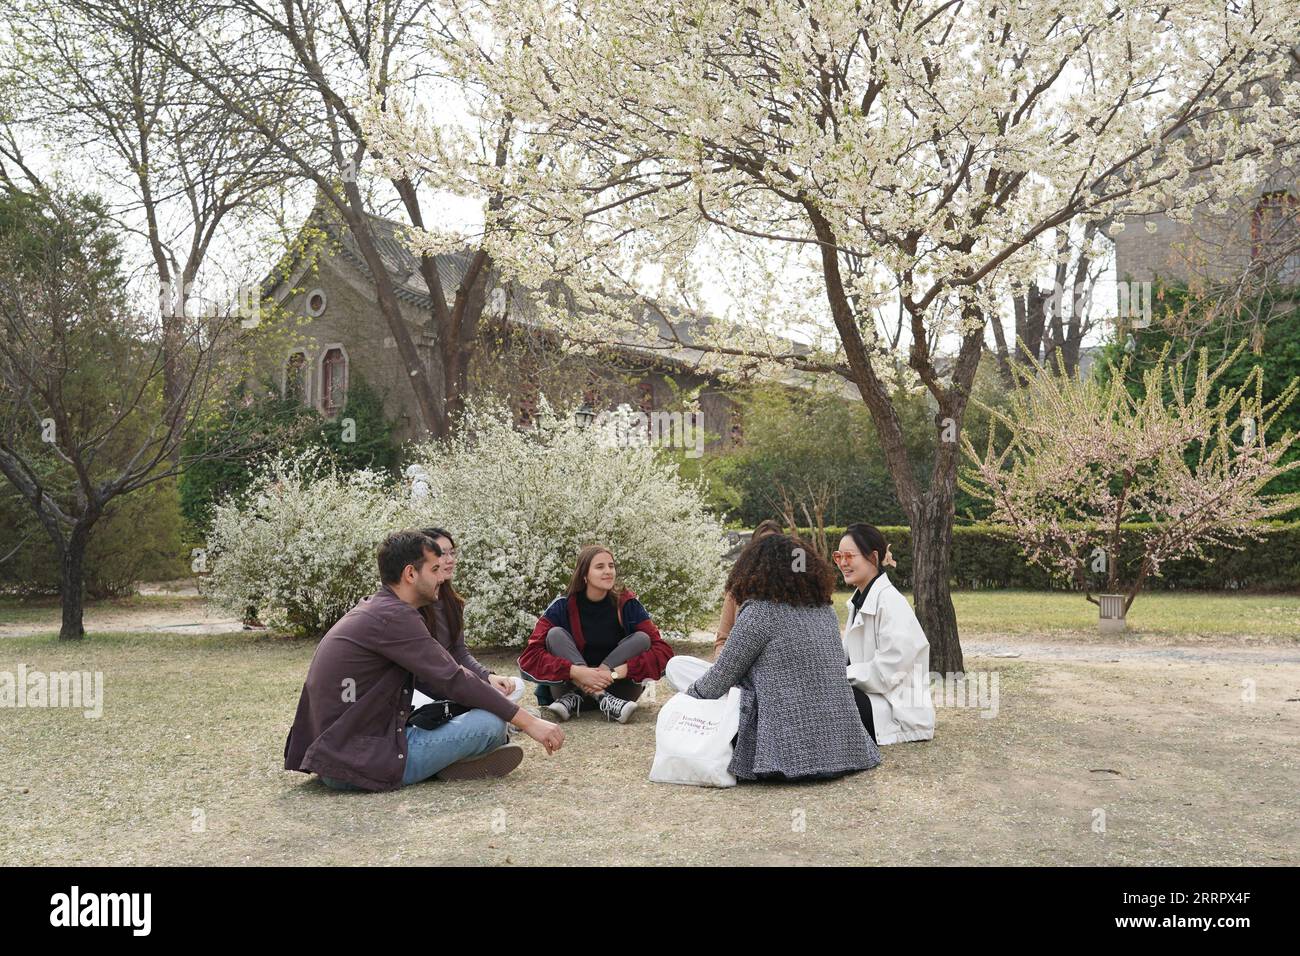 230415 -- BEIJING, April 15, 2023 -- Marco 1st L chats with schoolmates at Peking University in Beijing, capital of China, March 31, 2023. Maria Eduarda Variani, Rafaela Viana dos Santos, Manuela Boiteux Pestana, and Marco Andre Rocha Germano are Brazilian students studying in the Master of China Studies program at the Yenching Academy of Peking University in China. The four of them have been interested in Chinese culture since they were young. After arriving in Beijing, they have been impressed by the Chinese capital s profound cultural heritage, convenient public services, and fabulous citys Stock Photo